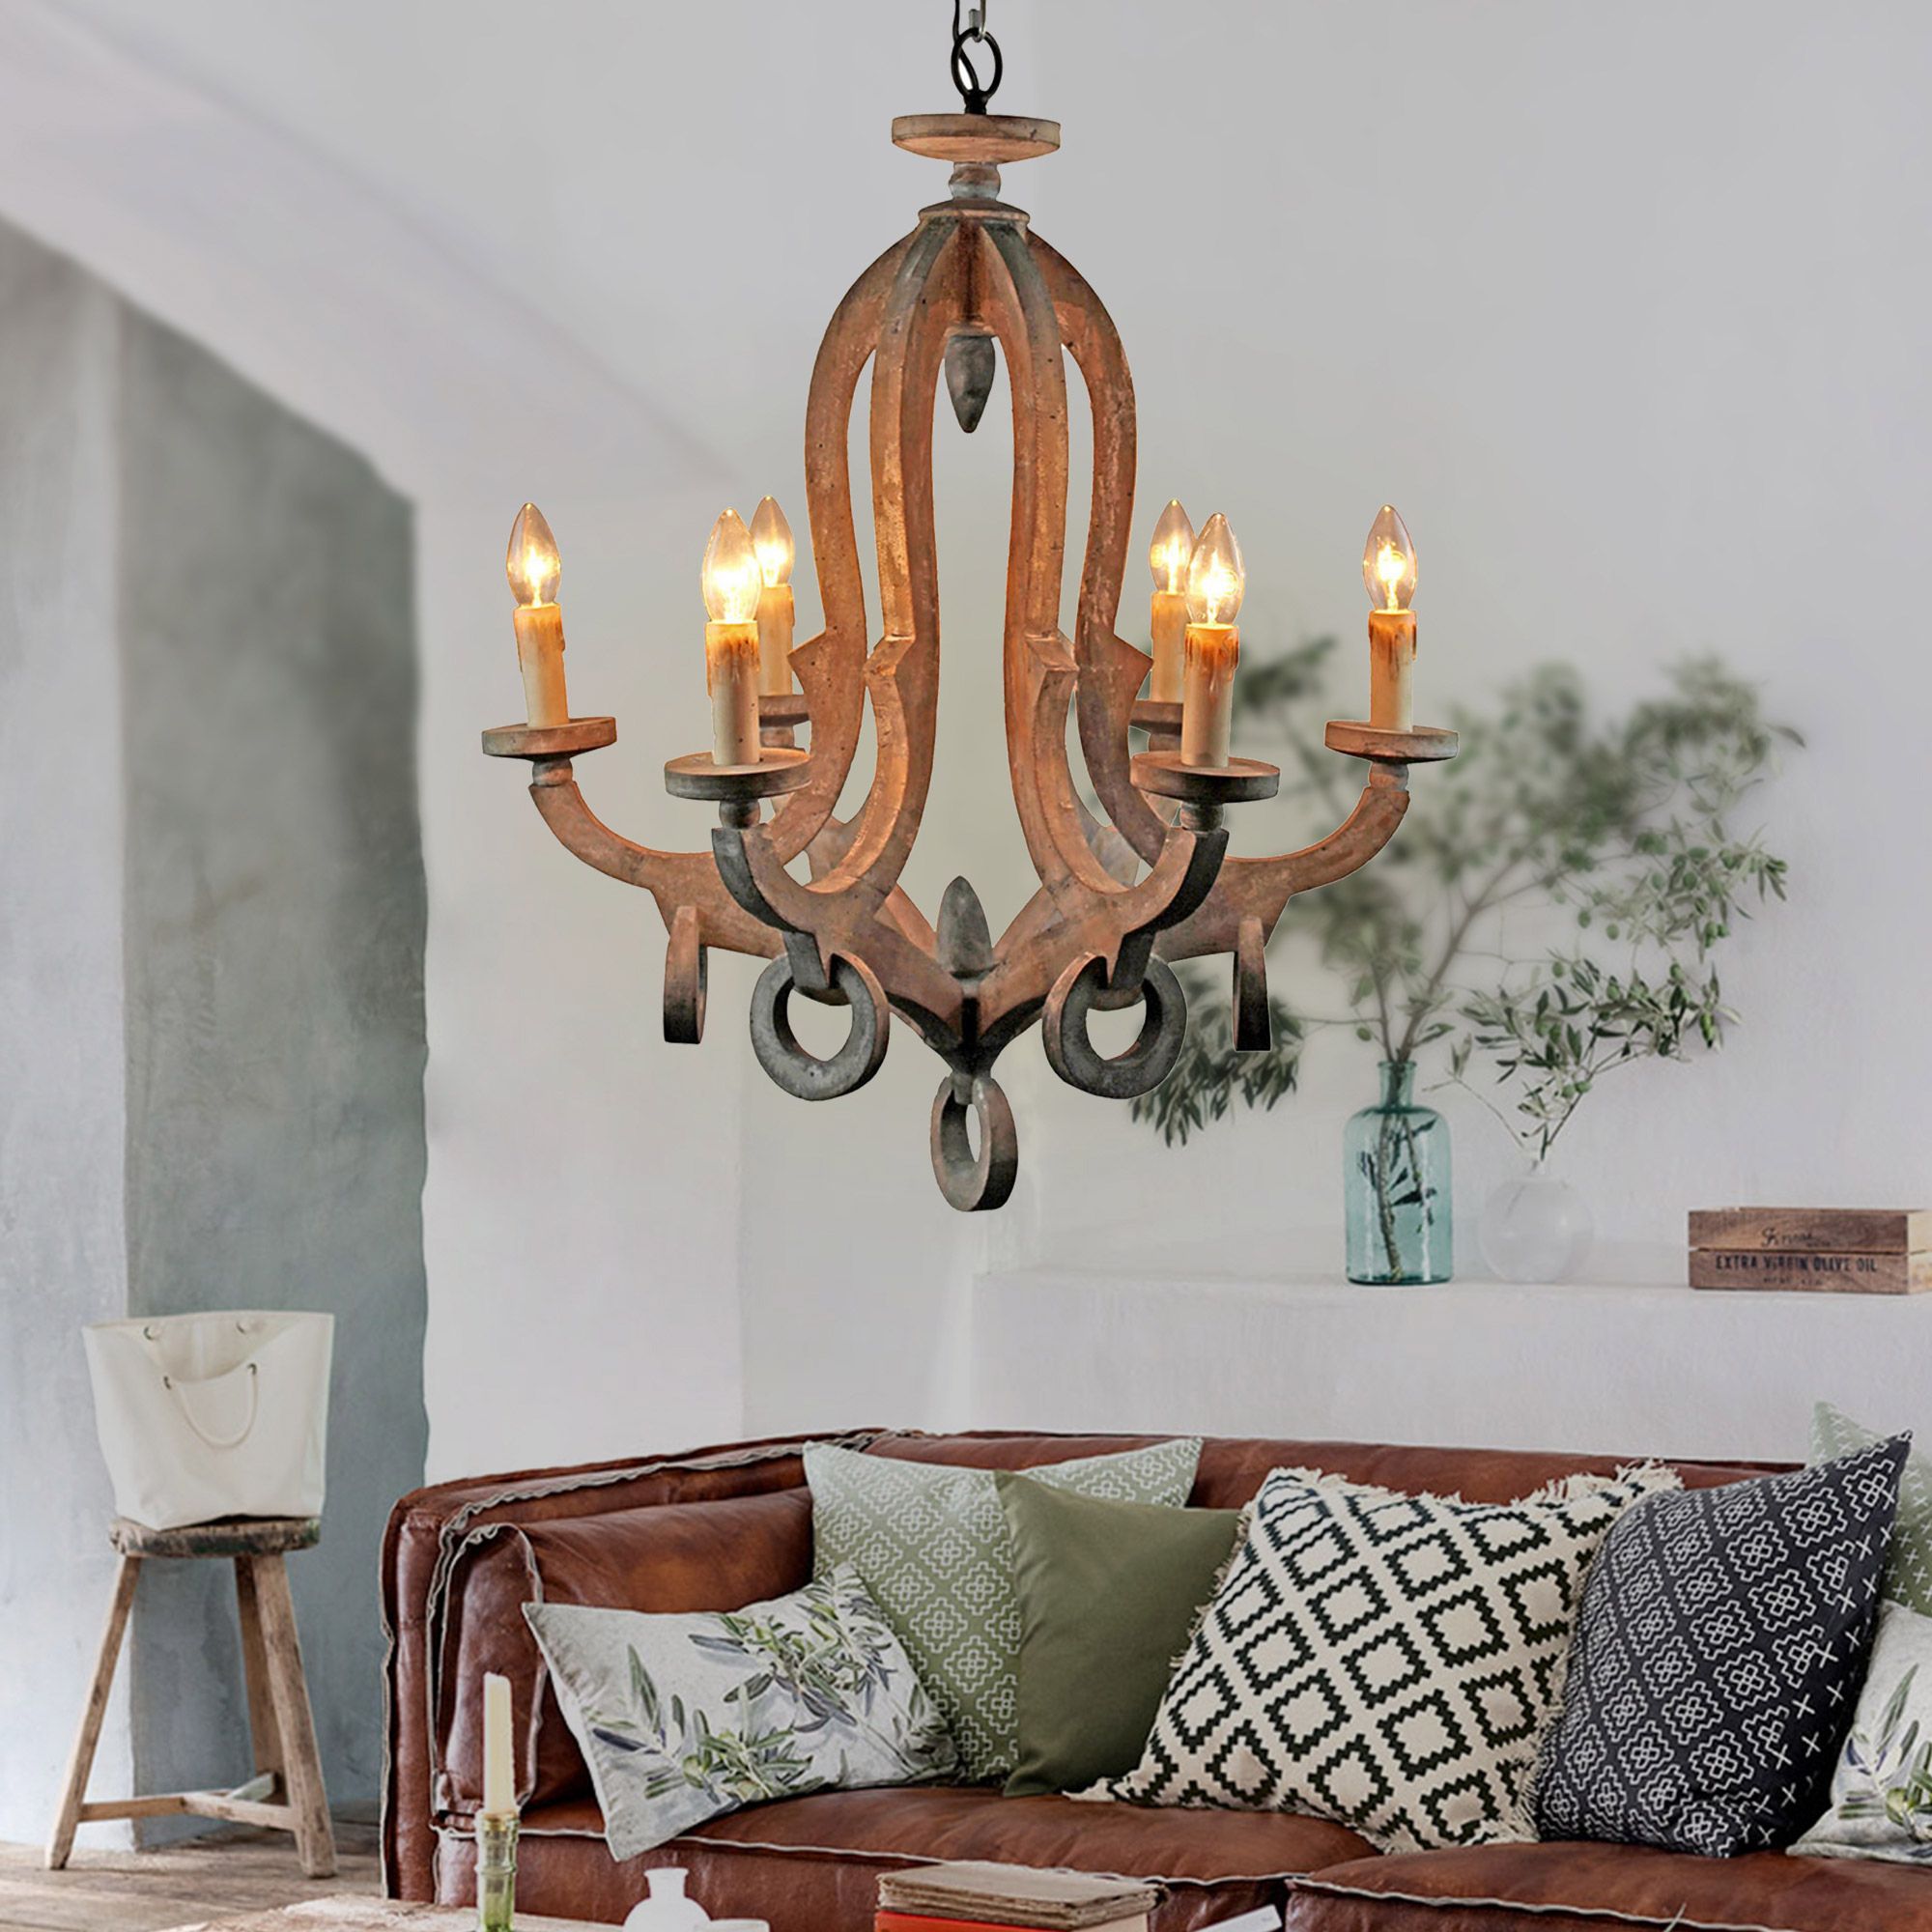 Farmhouse 6 Light Wooden Chandelier · Parrot Uncle Intended For Six Light Chandeliers (View 15 of 15)